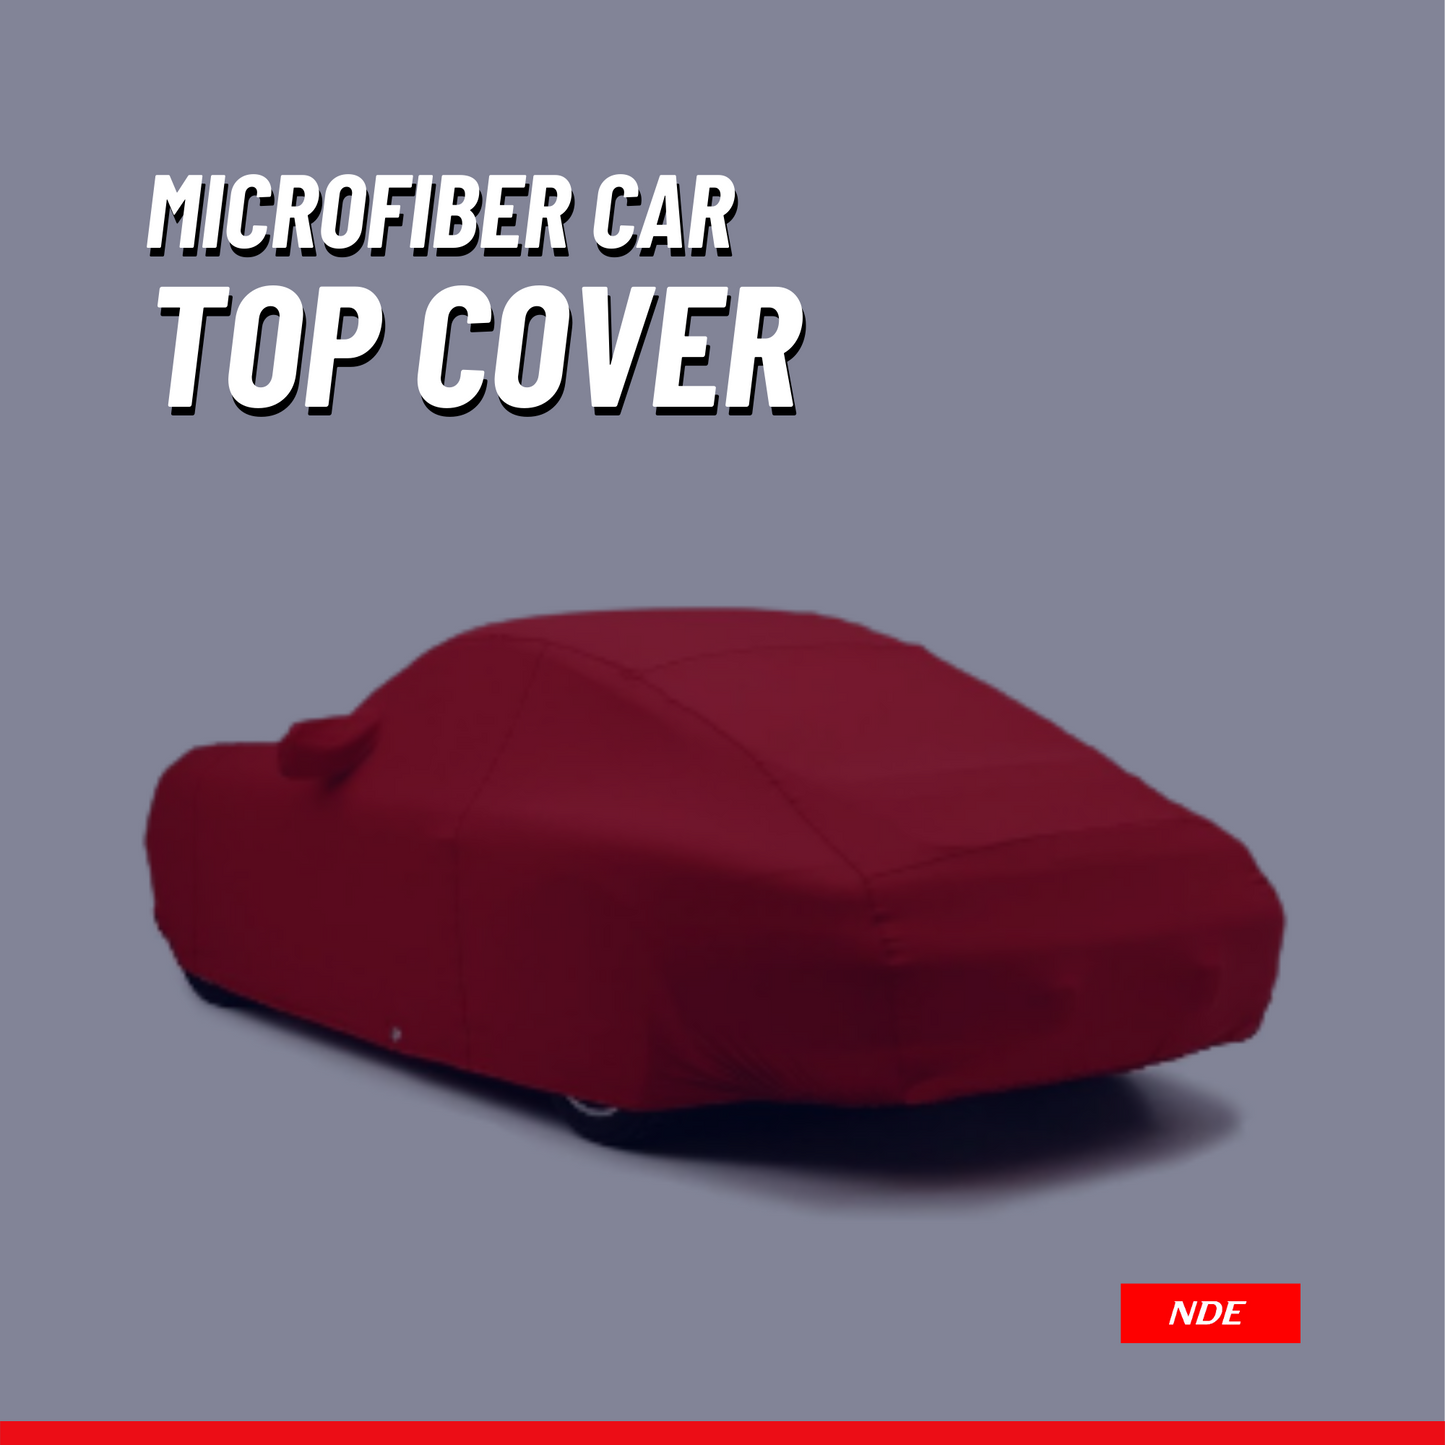 TOP COVER MICROFIBER FOR BMW 7 SERIES